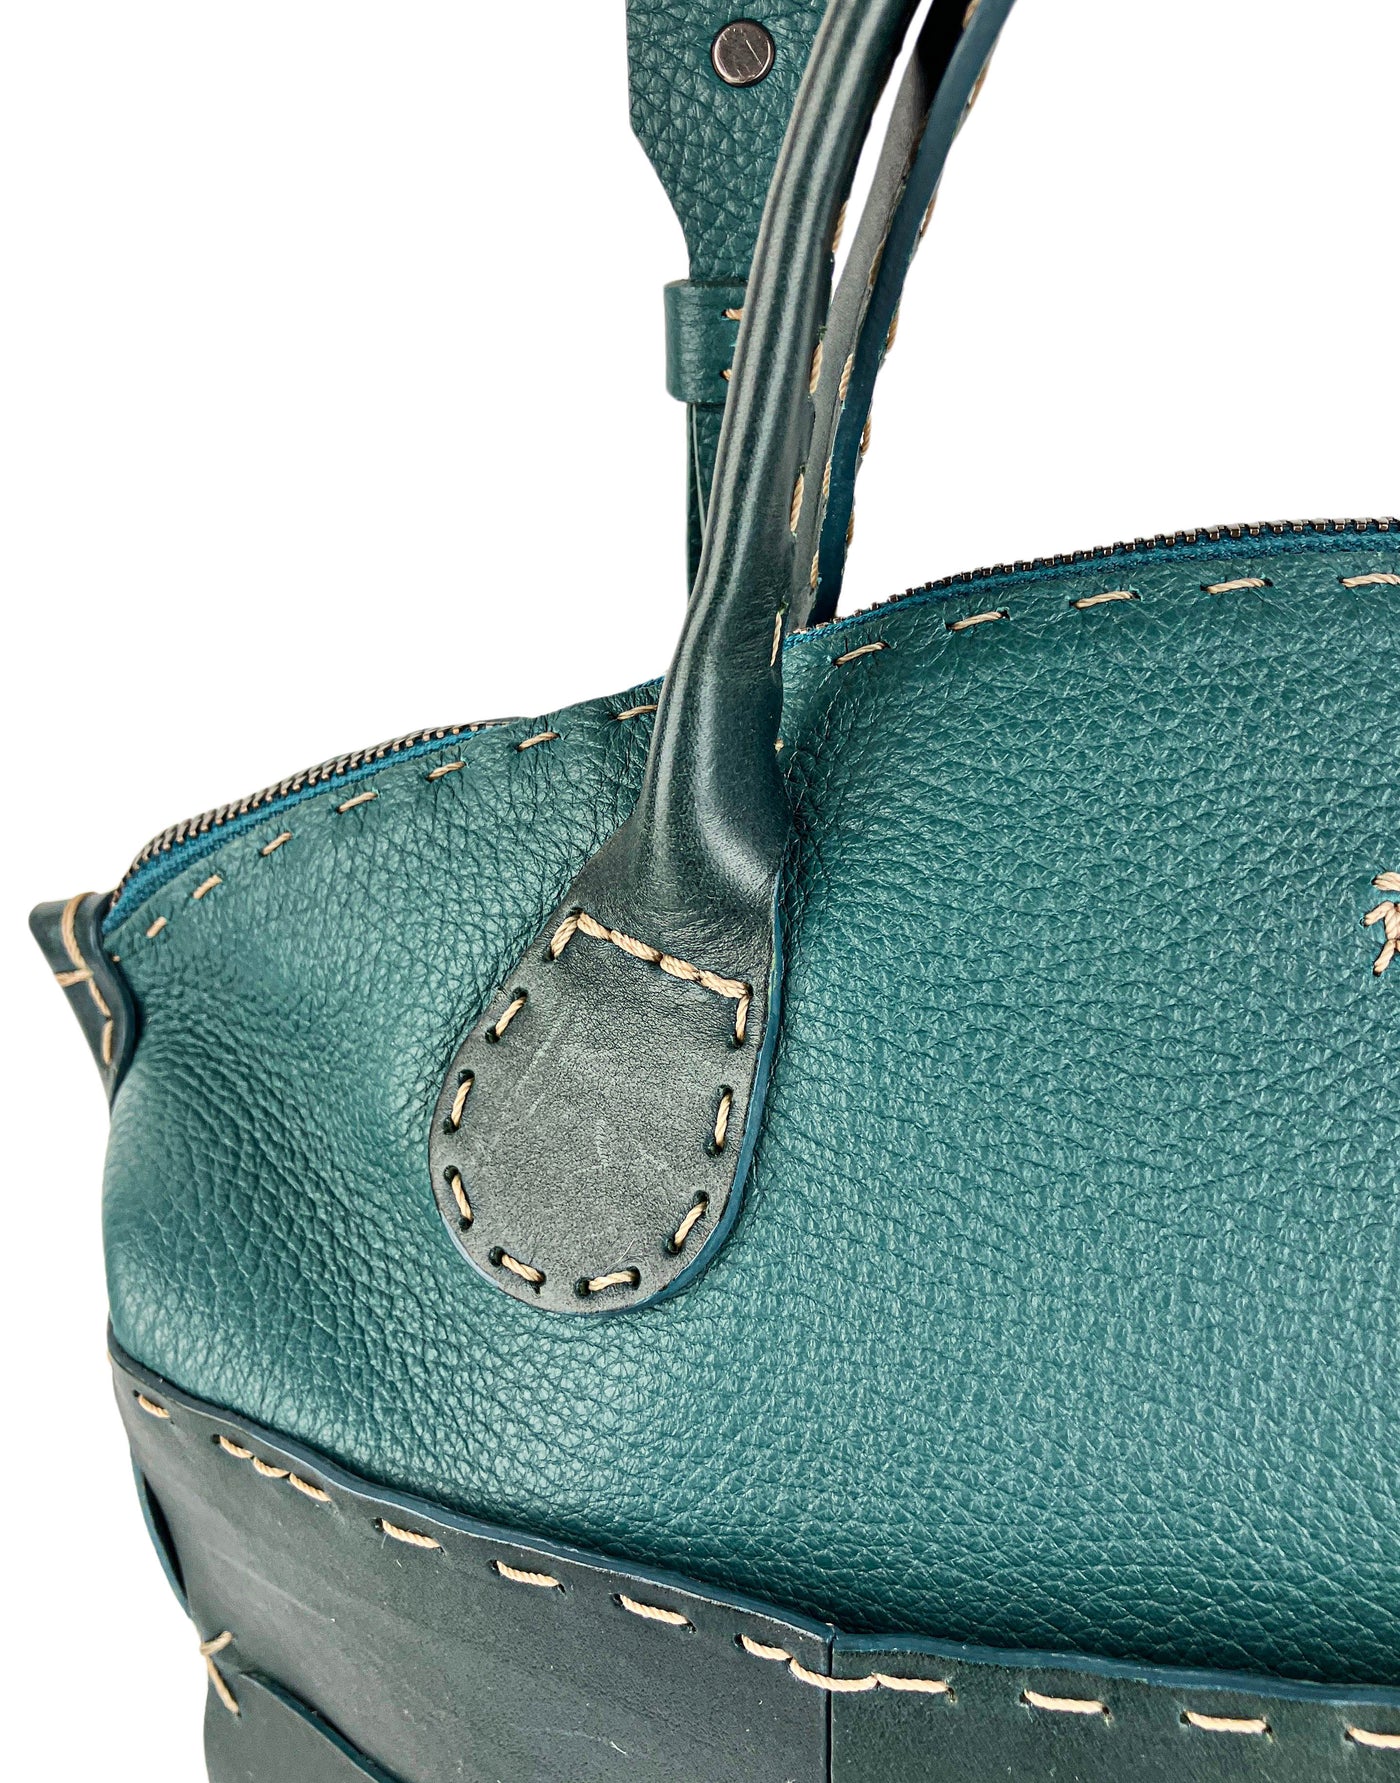 Henry Beguelin Virginia Mosaico Vegetal Wash in Teal - Discounts on Henry Beguelin at UAL